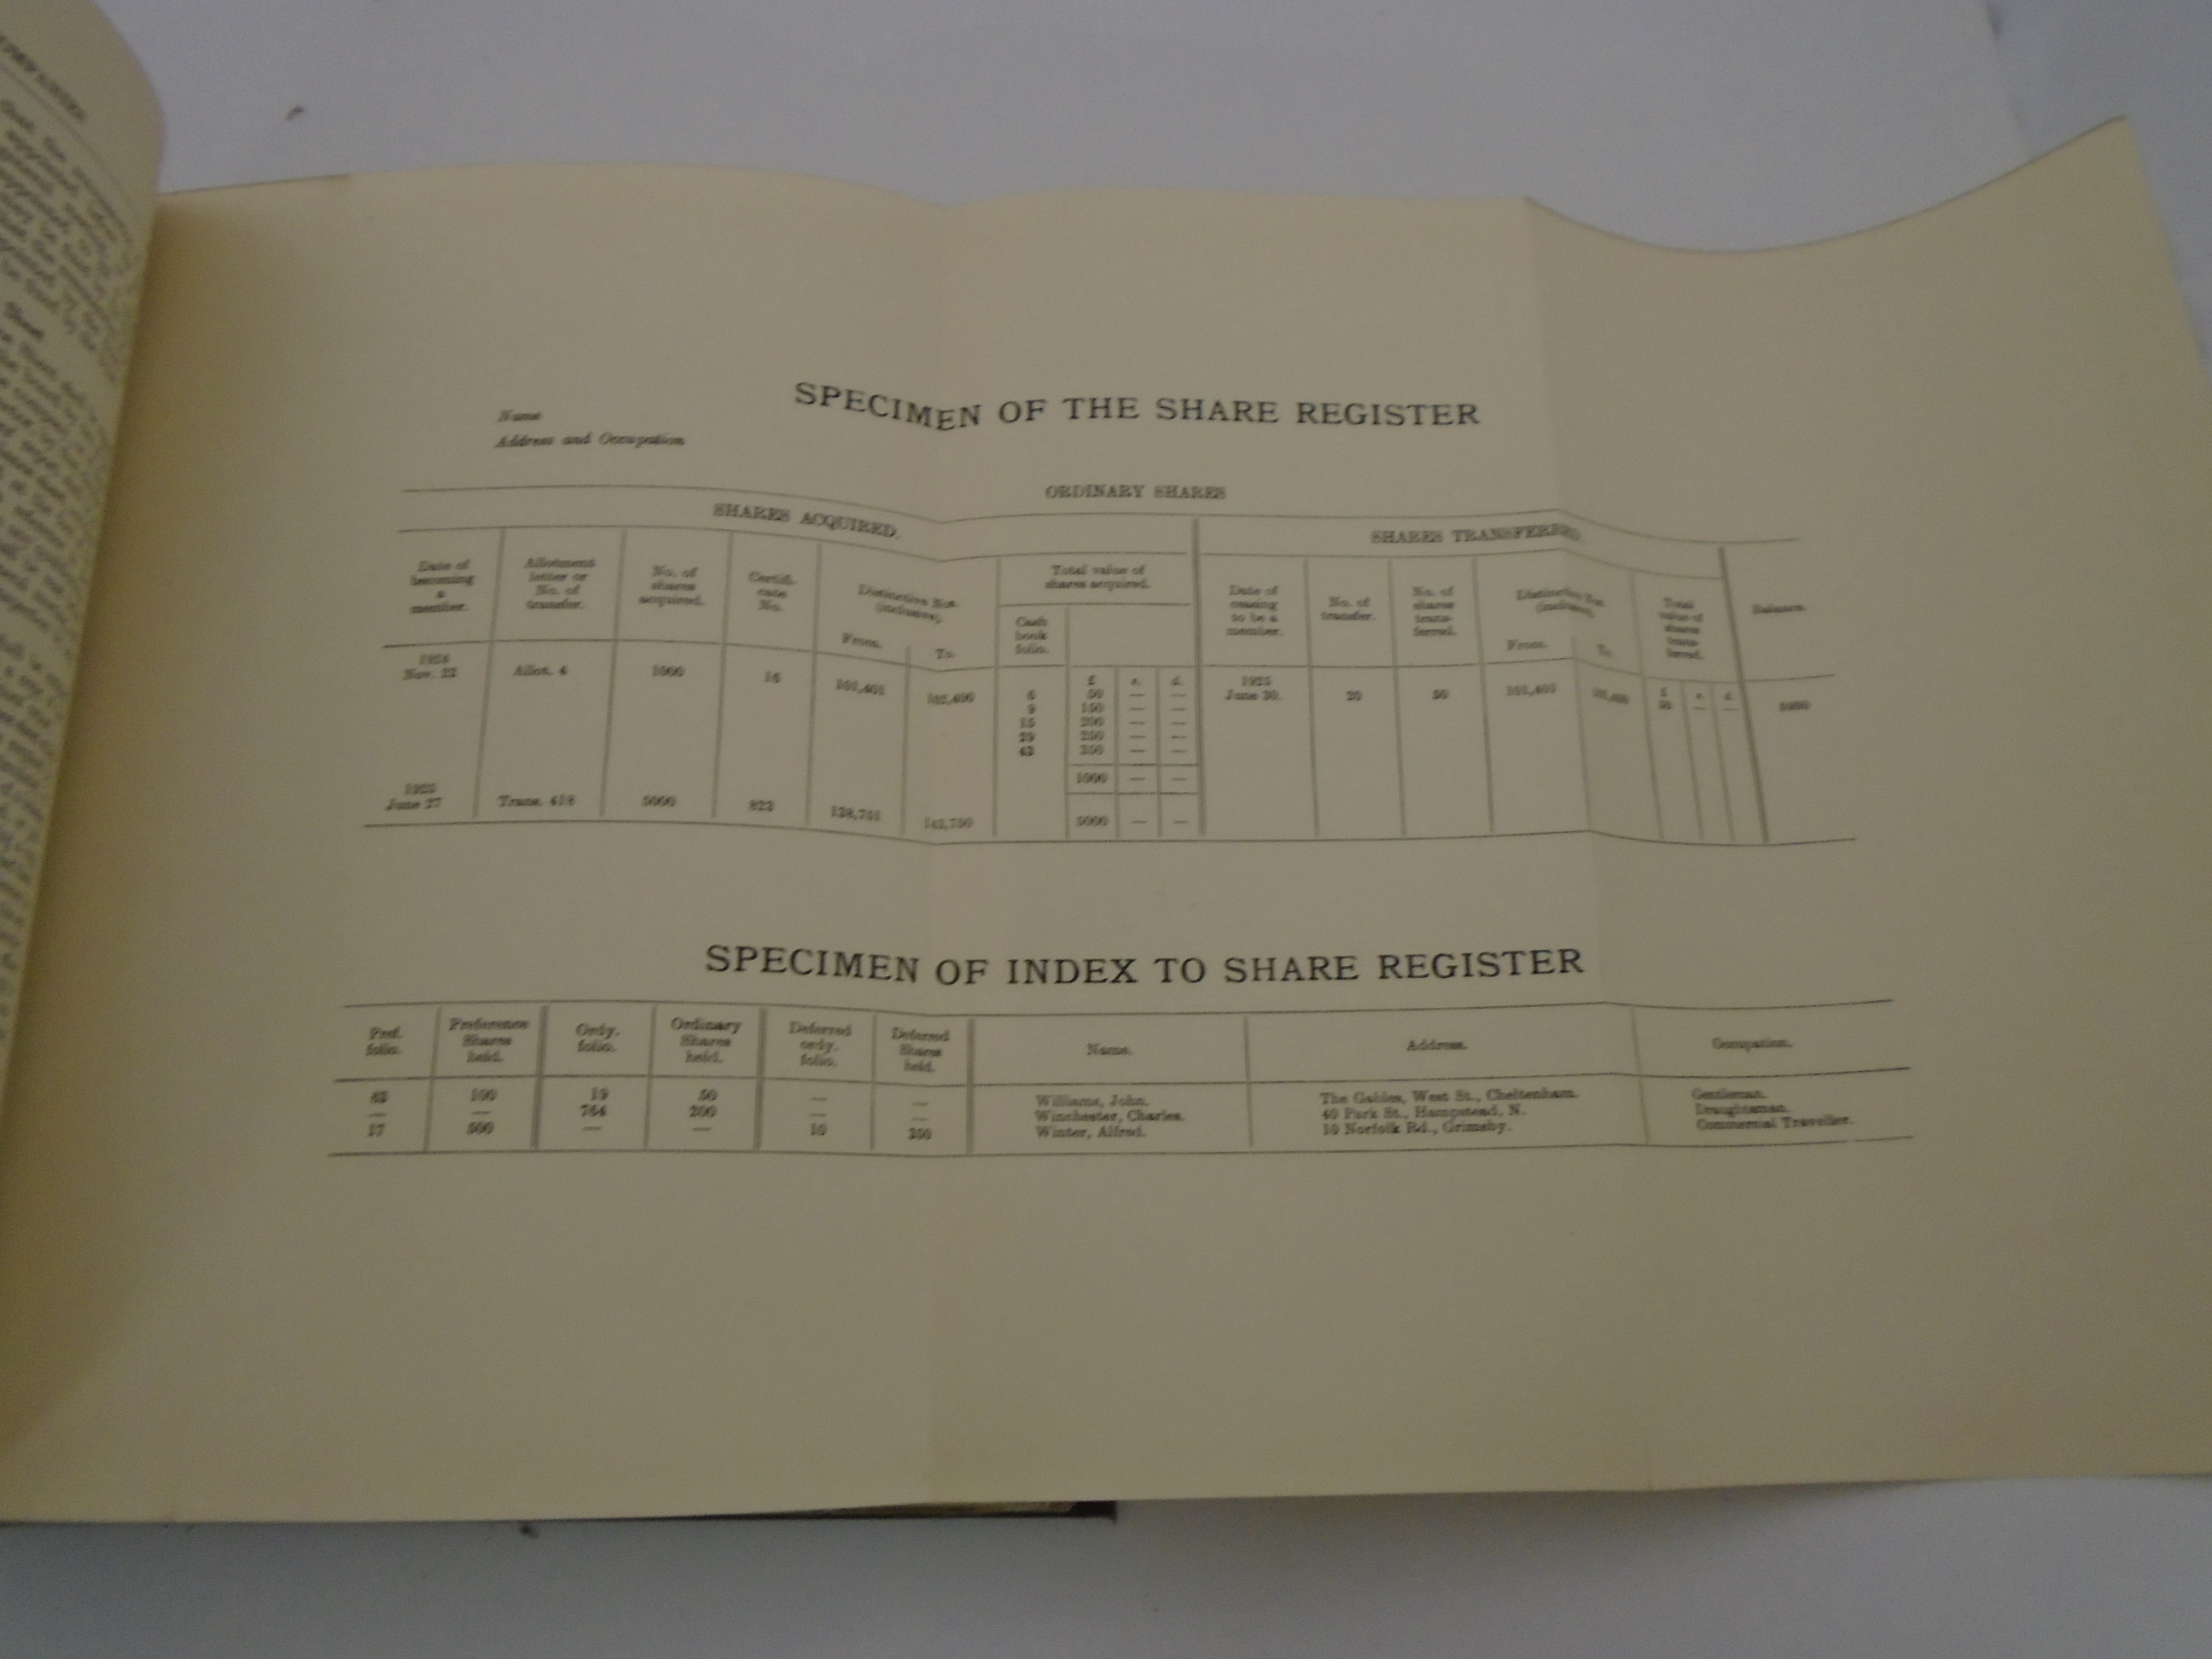 6 VOLUMES OF 20TH CENTURY BUSINESS PRACTICE CIRCA 1950 - Image 4 of 4